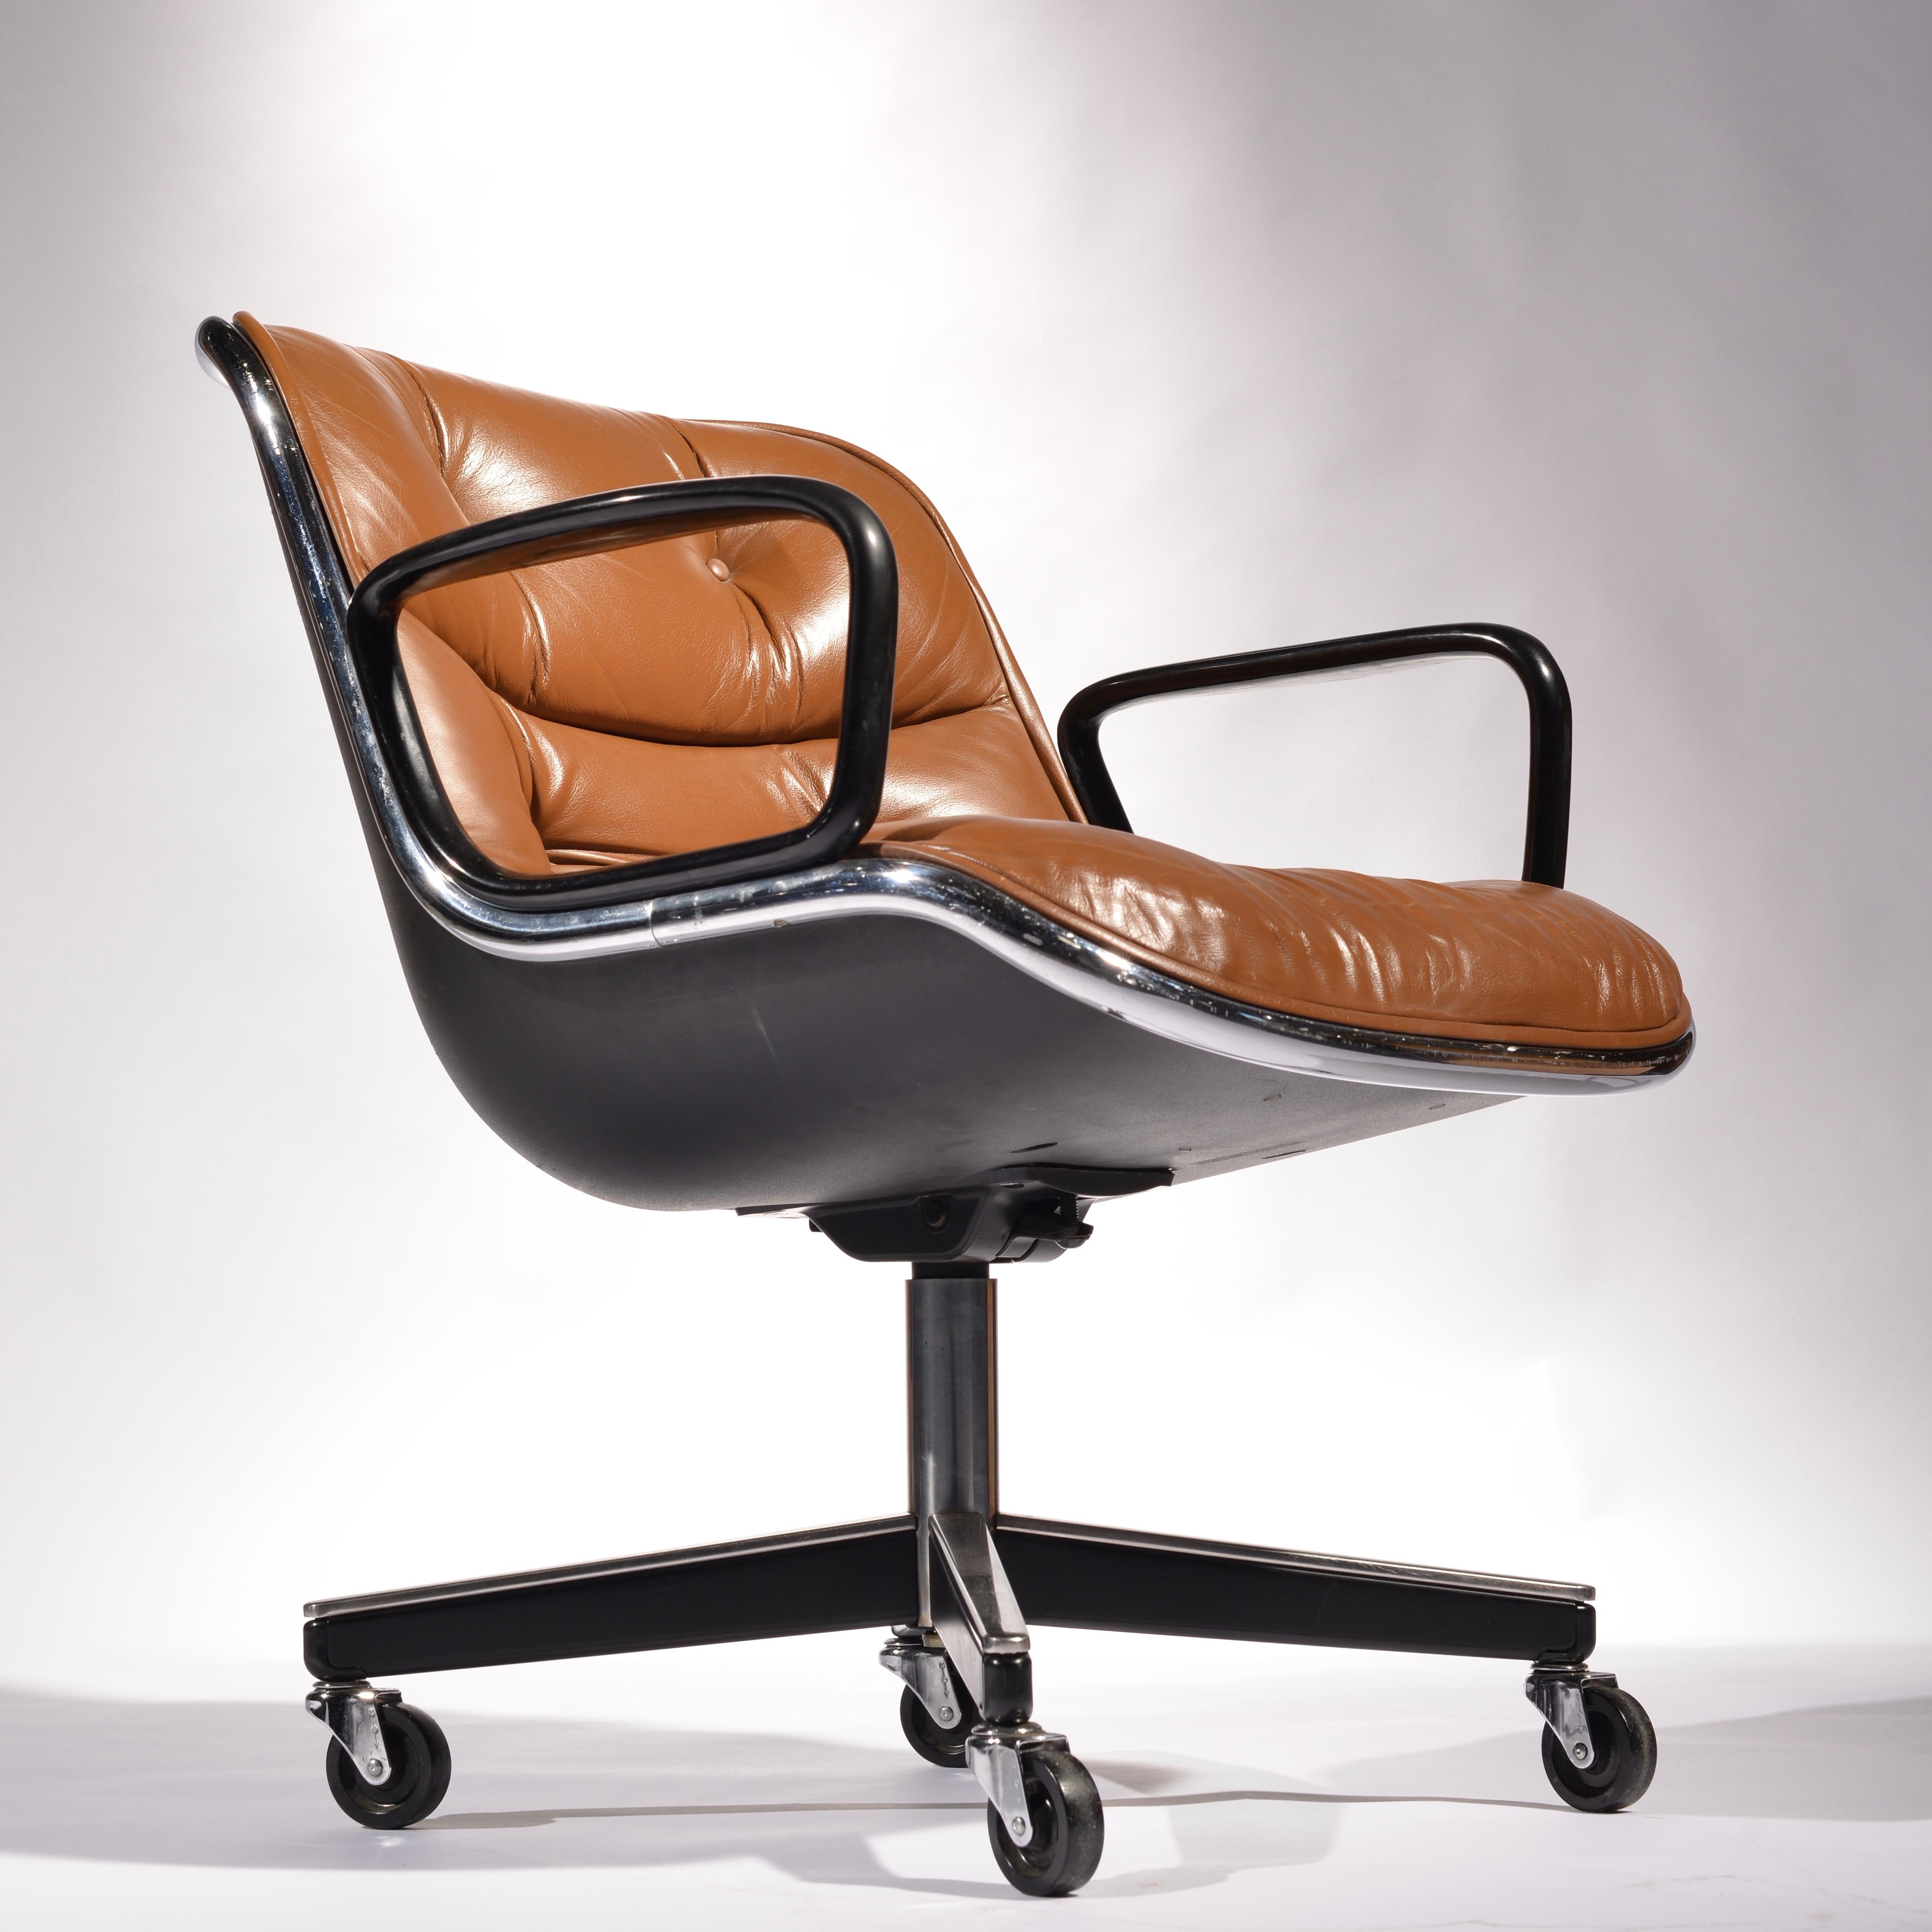 We have 10 vintage Charles Pollock executive desk chair for Knoll in the rare and amazing cognac leather. The ultimate ergonomic, office desk chair designed by this George Nelson apprentice, Charles Pollock. Chairs are adjustable. Priced per item.